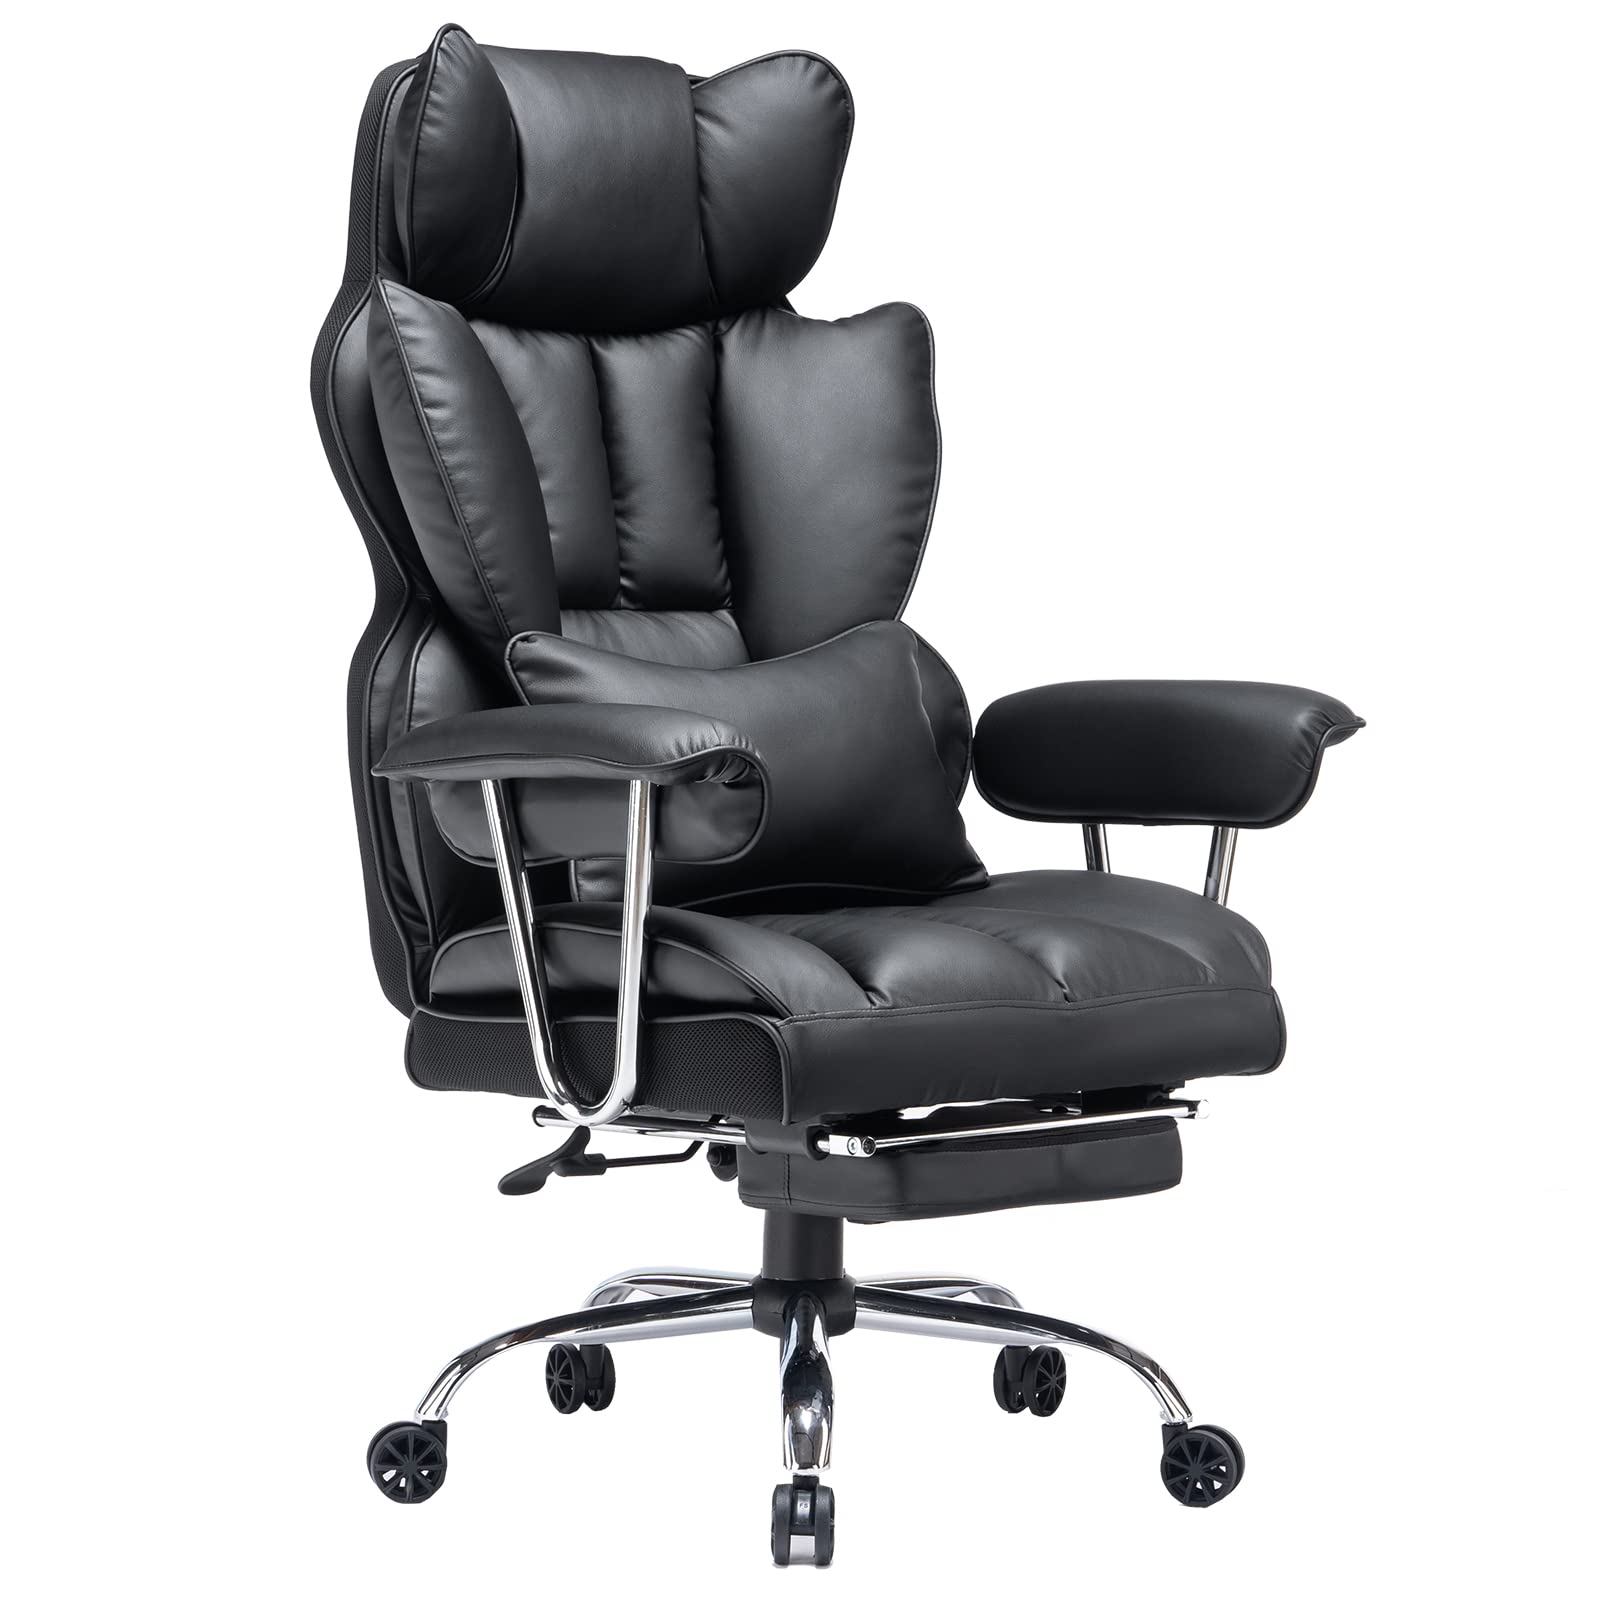 Efomao Desk Office Chair Big High Back Chair Pu Leather Computer Chair Managerial Executive Swivel Chair With Lumbar Support (Bl